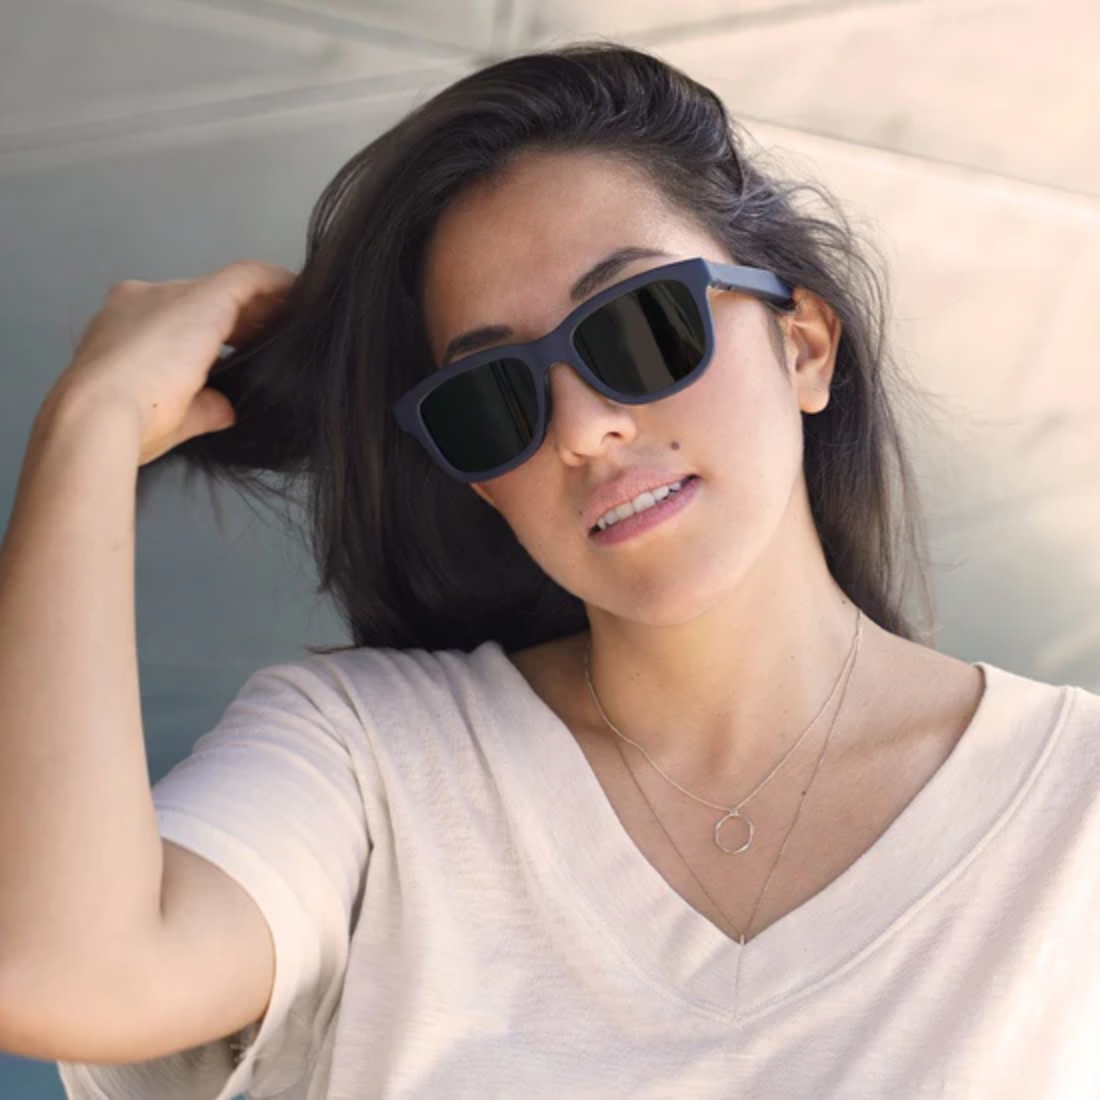 Ampere Dusk - App-enabled tint changing smart sunglasses with built-in audio